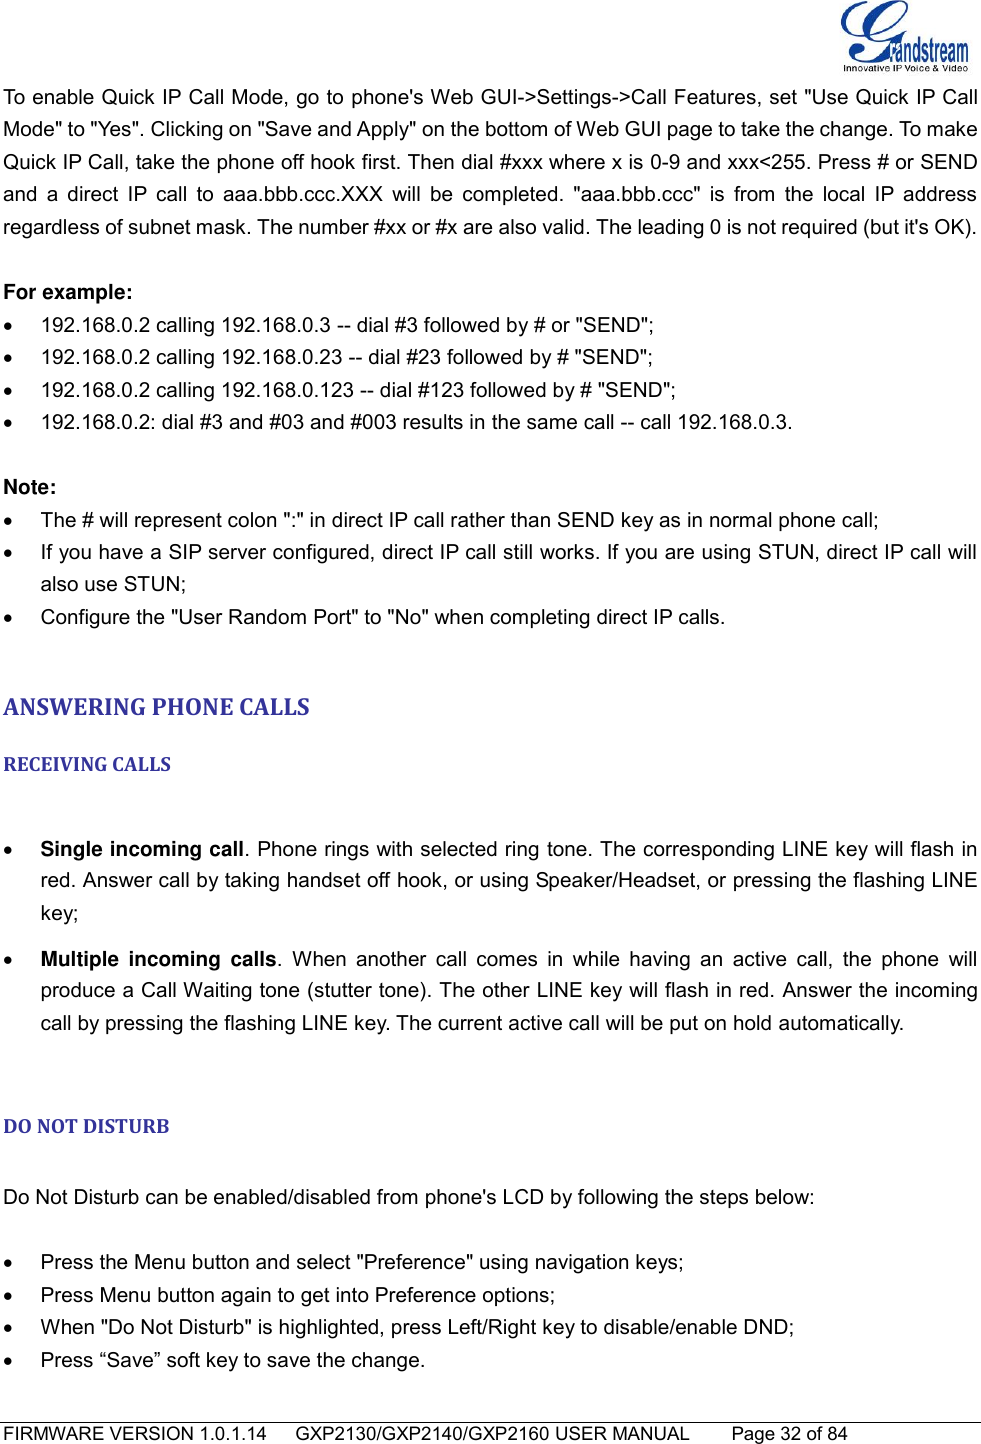   FIRMWARE VERSION 1.0.1.14      GXP2130/GXP2140/GXP2160 USER MANUAL     Page 32 of 84                                   To enable Quick IP Call Mode, go to phone&apos;s Web GUI-&gt;Settings-&gt;Call Features, set &quot;Use Quick IP Call Mode&quot; to &quot;Yes&quot;. Clicking on &quot;Save and Apply&quot; on the bottom of Web GUI page to take the change. To make Quick IP Call, take the phone off hook first. Then dial #xxx where x is 0-9 and xxx&lt;255. Press # or SEND and a  direct  IP call  to aaa.bbb.ccc.XXX  will be  completed.  &quot;aaa.bbb.ccc&quot;  is from  the local  IP  address regardless of subnet mask. The number #xx or #x are also valid. The leading 0 is not required (but it&apos;s OK).  For example:   192.168.0.2 calling 192.168.0.3 -- dial #3 followed by # or &quot;SEND&quot;;   192.168.0.2 calling 192.168.0.23 -- dial #23 followed by # &quot;SEND&quot;;   192.168.0.2 calling 192.168.0.123 -- dial #123 followed by # &quot;SEND&quot;;   192.168.0.2: dial #3 and #03 and #003 results in the same call -- call 192.168.0.3.  Note:   The # will represent colon &quot;:&quot; in direct IP call rather than SEND key as in normal phone call;   If you have a SIP server configured, direct IP call still works. If you are using STUN, direct IP call will also use STUN;   Configure the &quot;User Random Port&quot; to &quot;No&quot; when completing direct IP calls.  ANSWERING PHONE CALLS RECEIVING CALLS   Single incoming call. Phone rings with selected ring tone. The corresponding LINE key will flash in red. Answer call by taking handset off hook, or using Speaker/Headset, or pressing the flashing LINE key;  Multiple  incoming  calls.  When  another  call comes  in  while  having  an  active  call,  the  phone  will produce a Call Waiting tone (stutter tone). The other LINE key will flash in red. Answer the incoming call by pressing the flashing LINE key. The current active call will be put on hold automatically.  DO NOT DISTURB  Do Not Disturb can be enabled/disabled from phone&apos;s LCD by following the steps below:    Press the Menu button and select &quot;Preference&quot; using navigation keys;   Press Menu button again to get into Preference options;   When &quot;Do Not Disturb&quot; is highlighted, press Left/Right key to disable/enable DND;   Press “Save” soft key to save the change.   